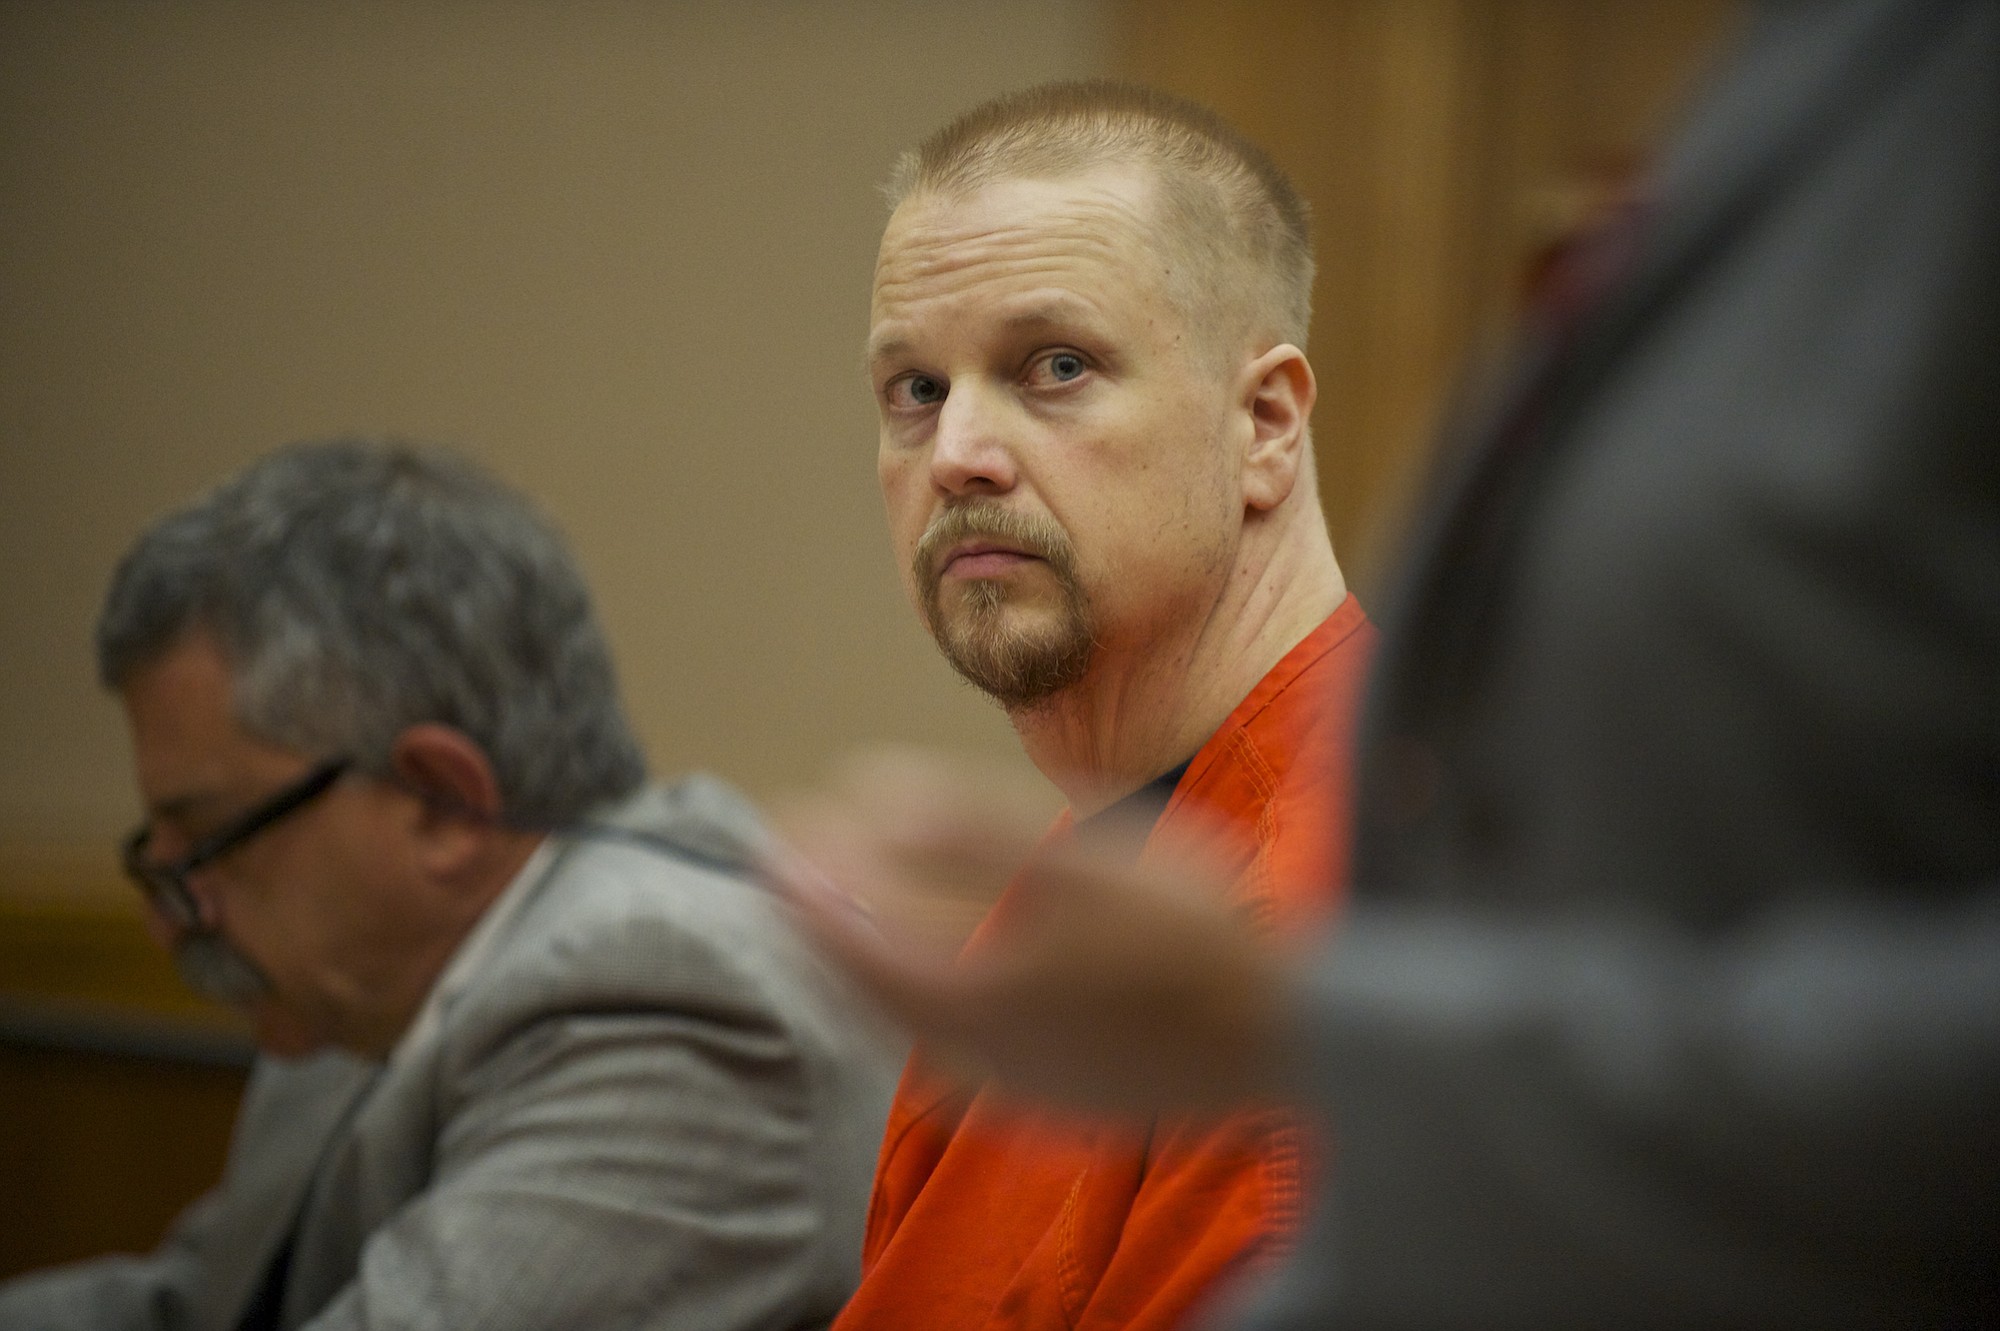 Troy Fisher of Brush Prairie, who was sentenced to 40 years in prison for murdering his father in 2011, will be resentenced for the crime, a Washington appeals court ruled Tuesday.